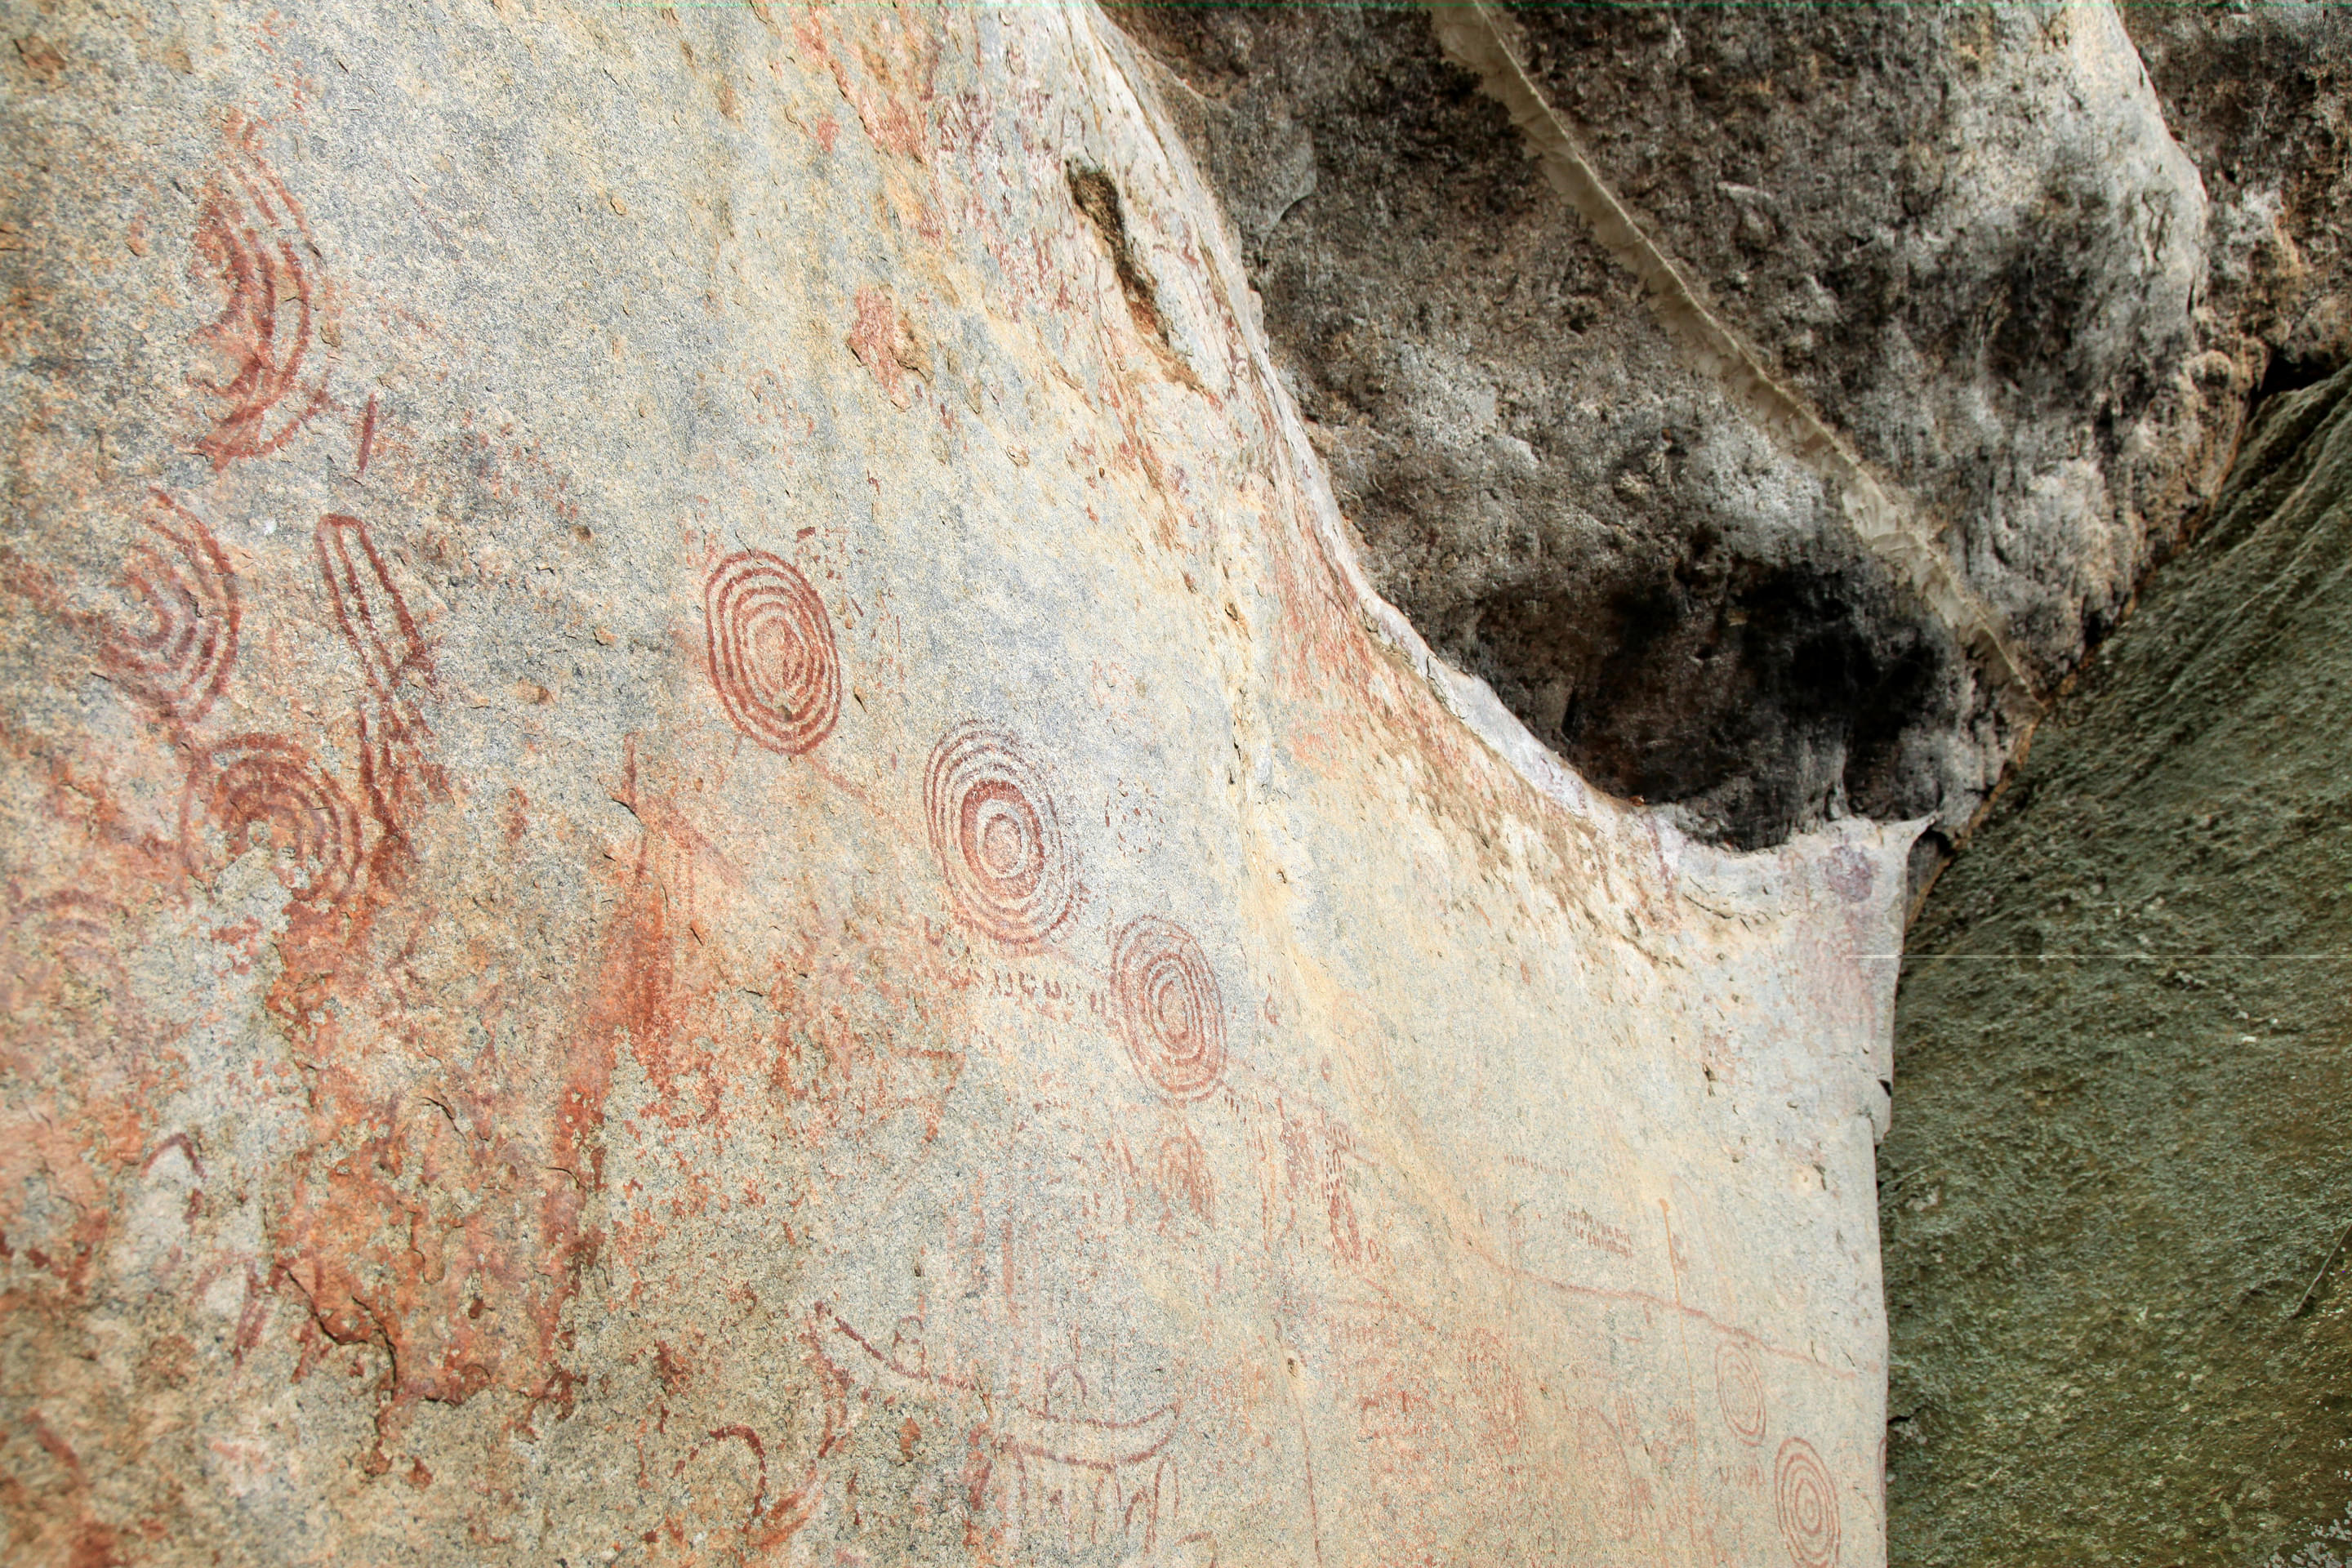 Nyero Rock Paintings Overview